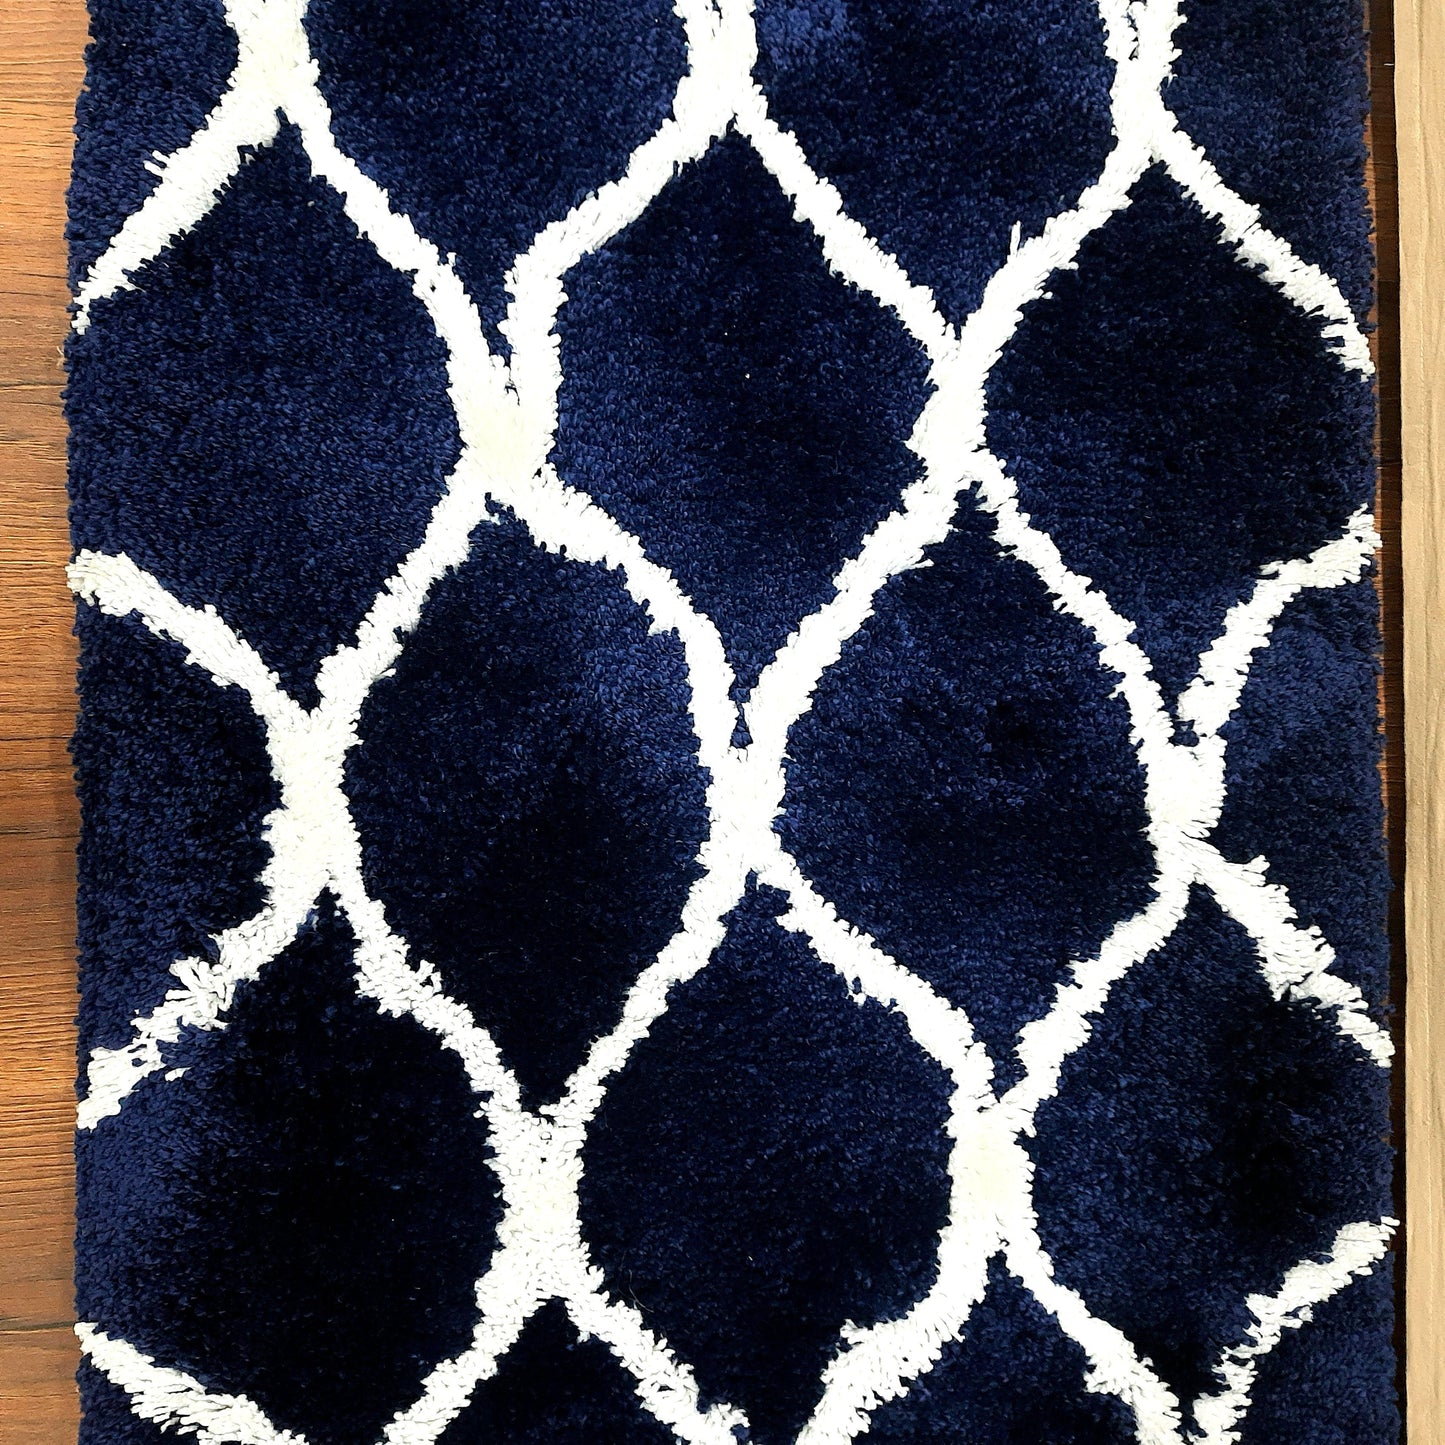 Plush Soft Washable Shaggy Navy Blue Carpet With White Moroccan Design /Bedside Runners by Avioni Home